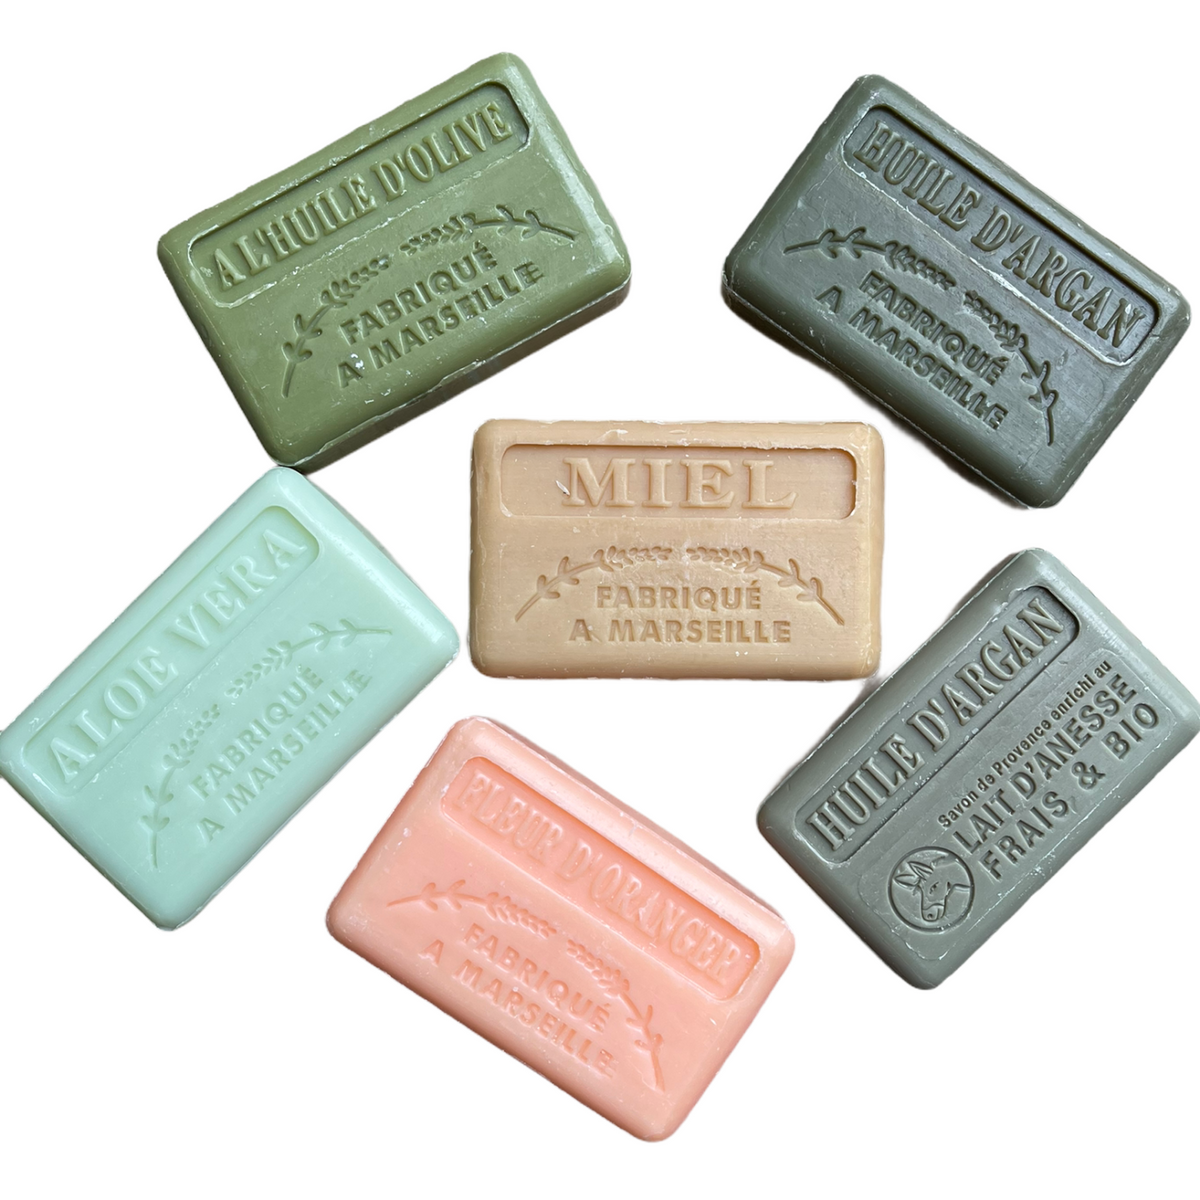 dry skin soap collection